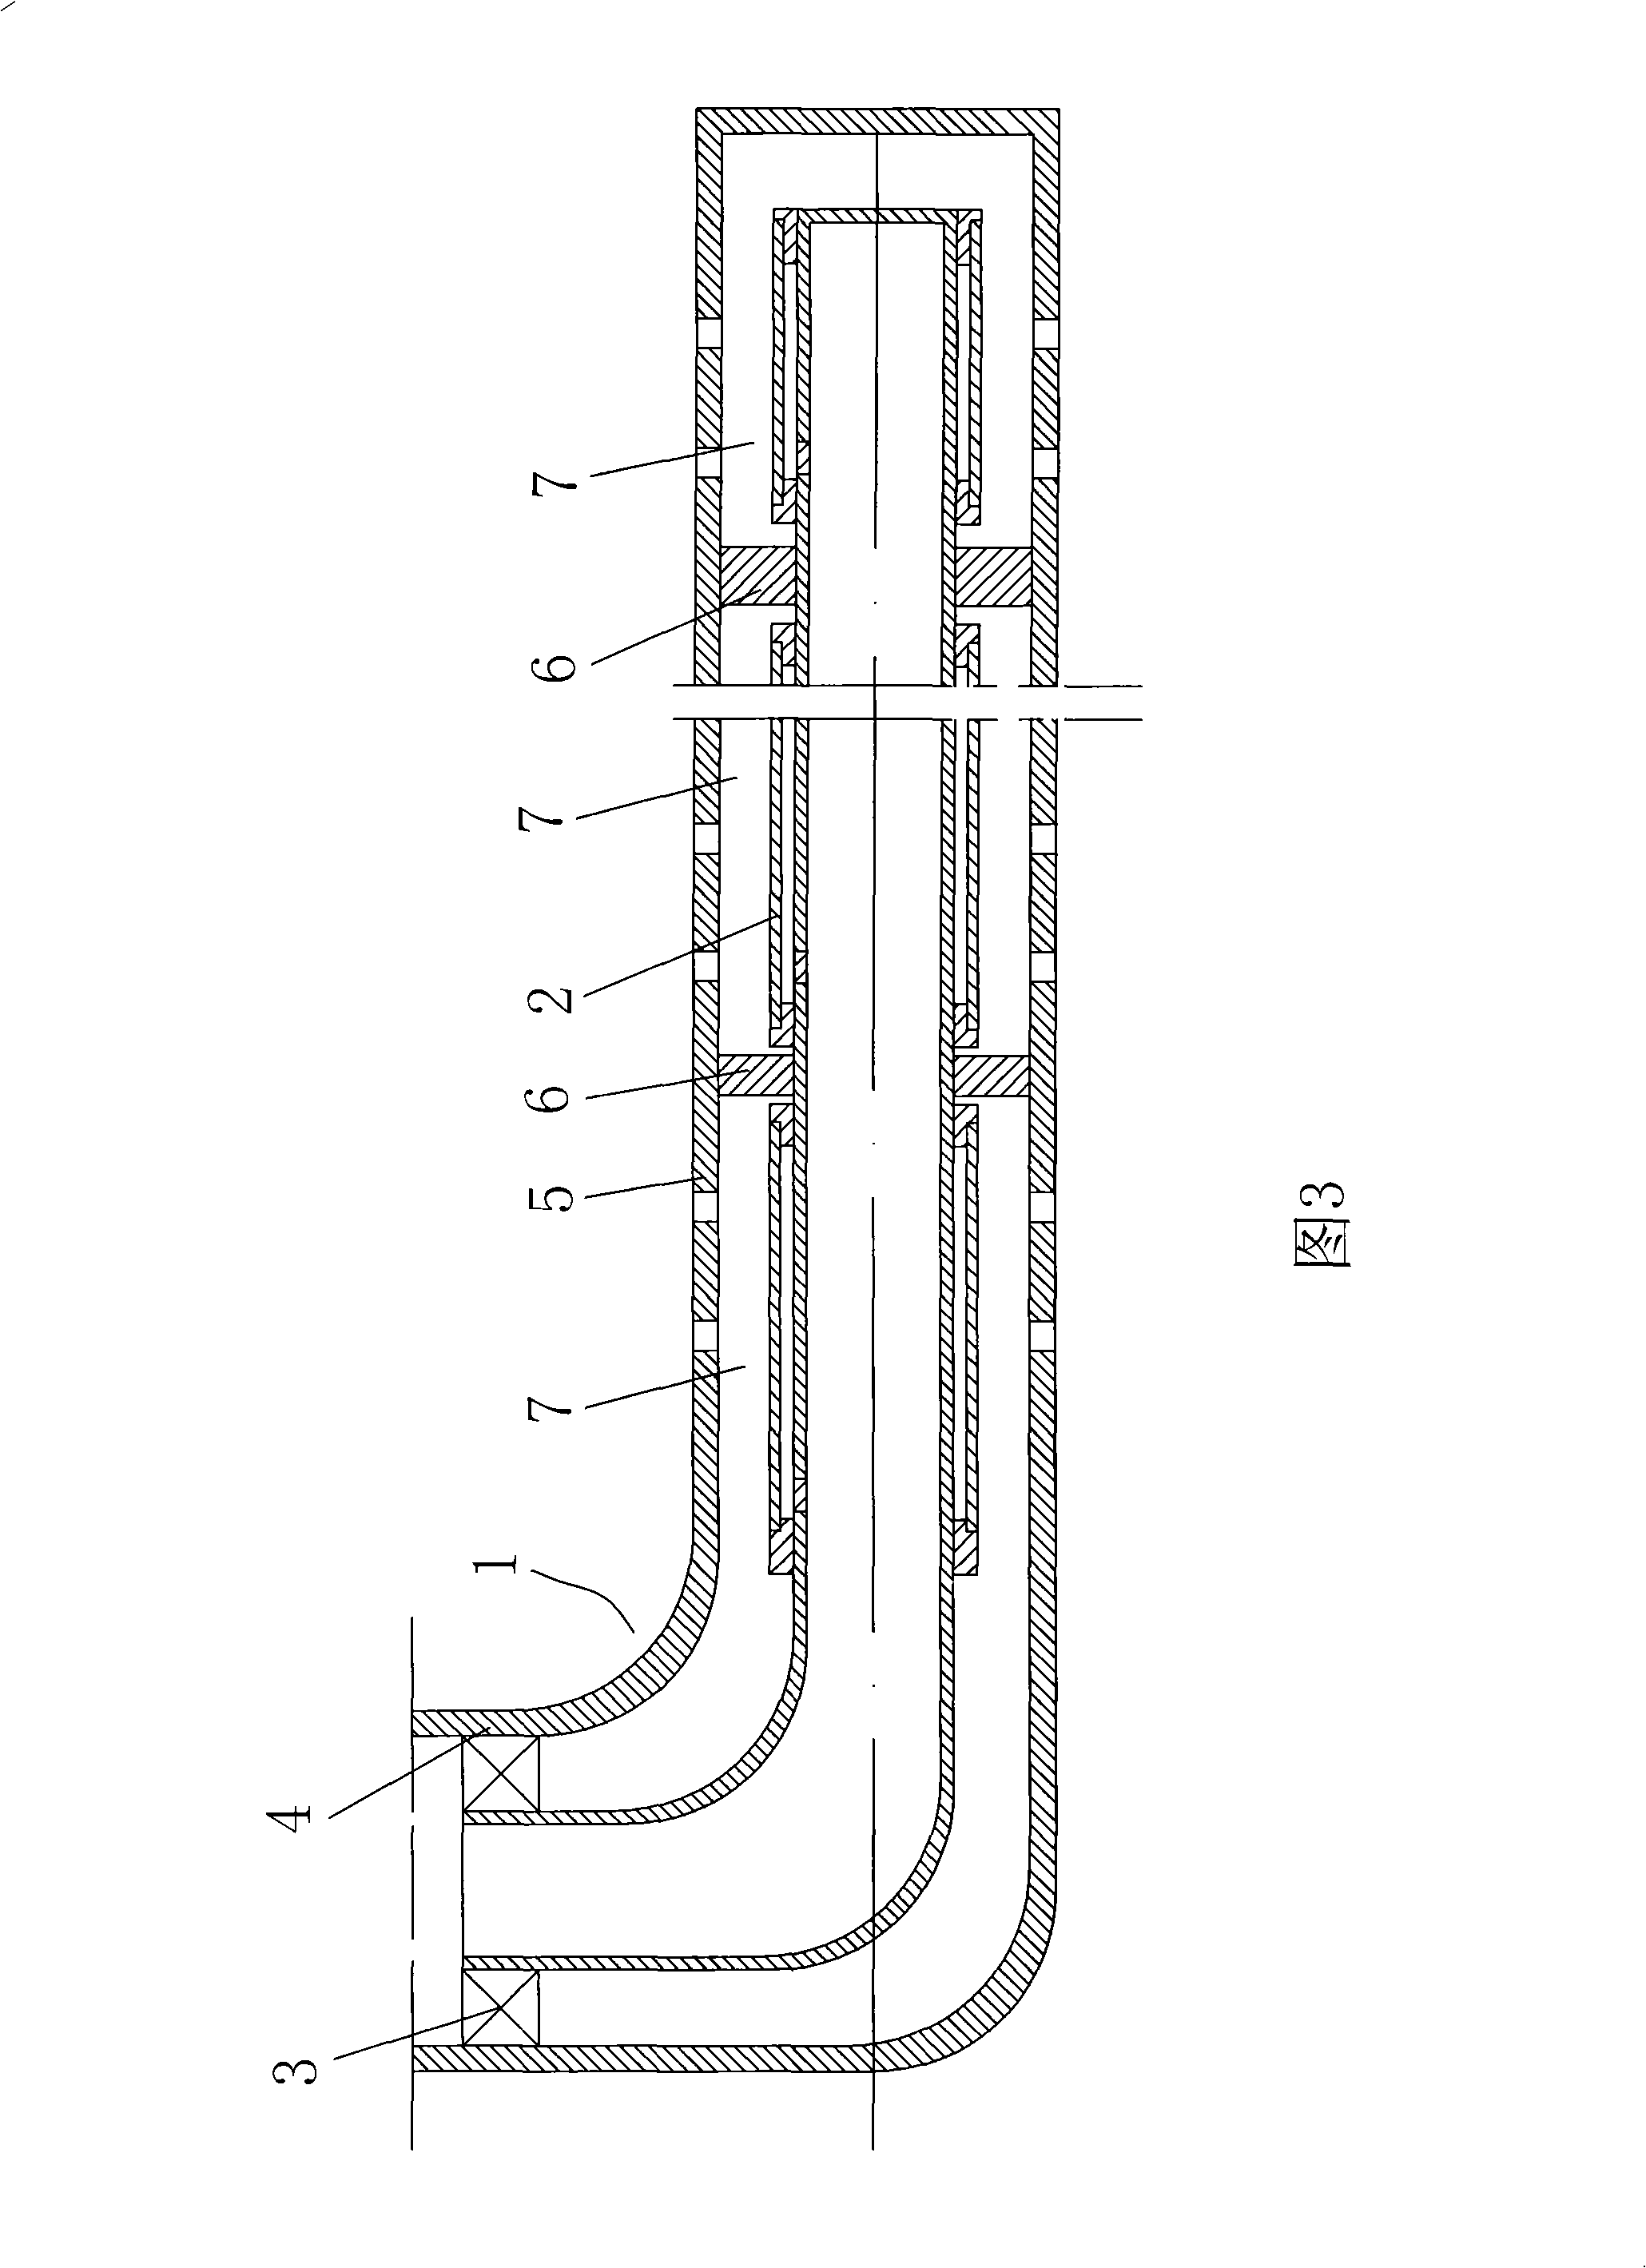 Horizontal production-injection well completion structure possessing flow control function